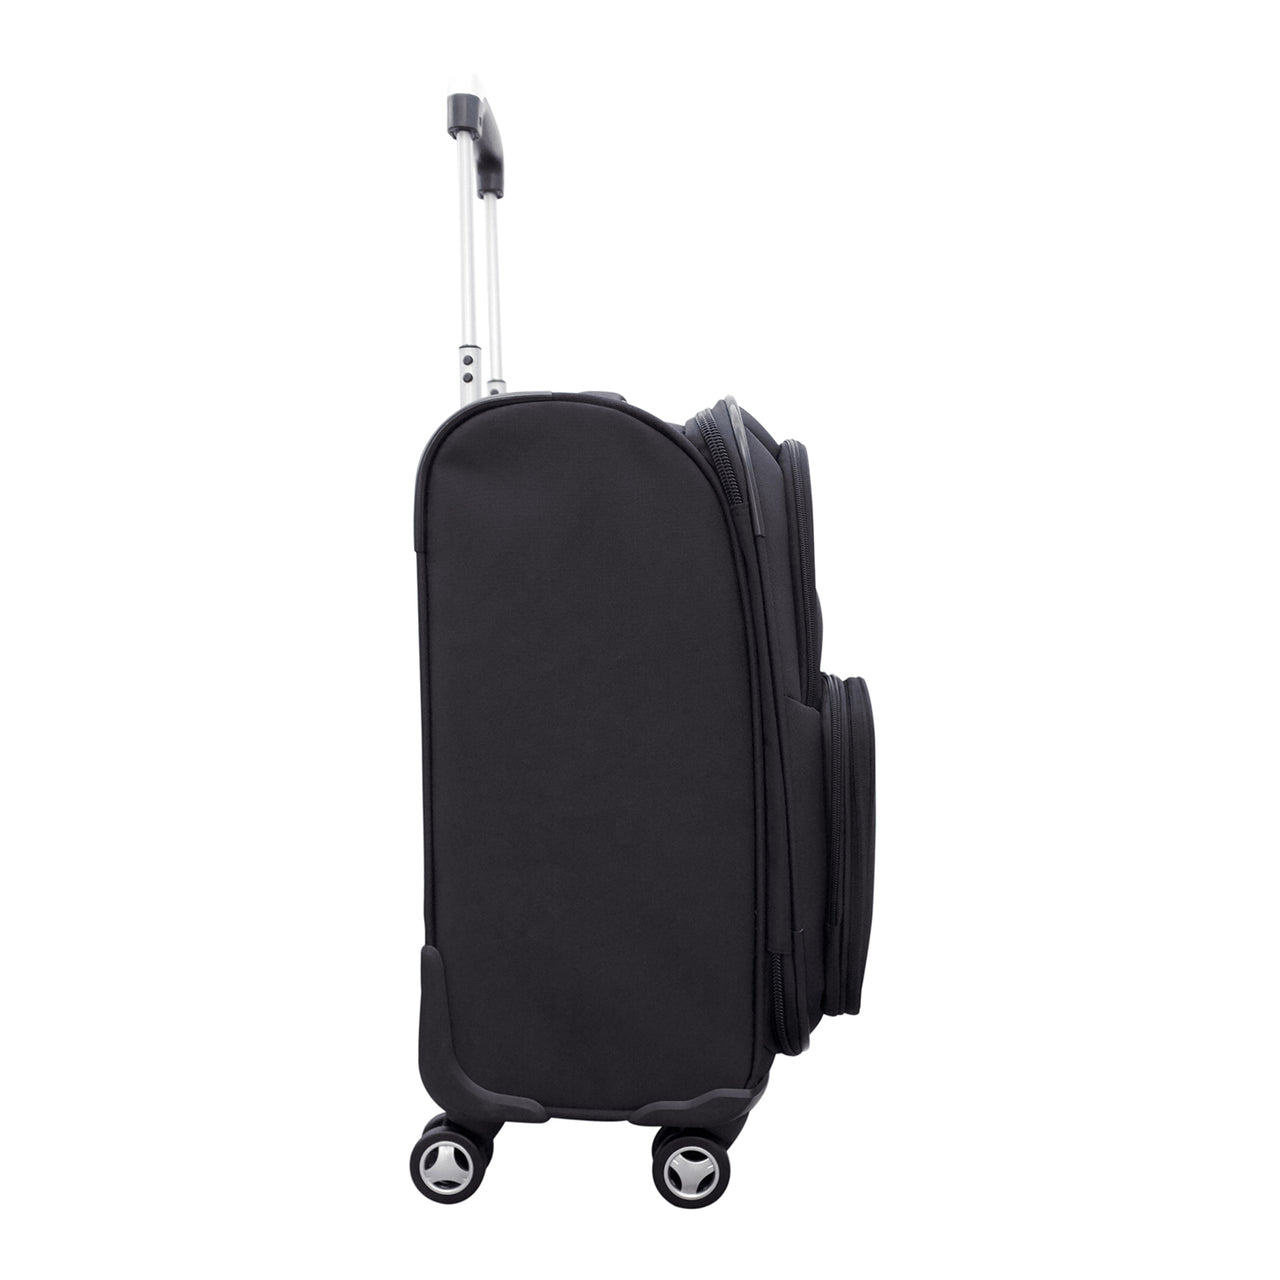 South Dakota Coyotes 20" Carry-on Spinner Luggage